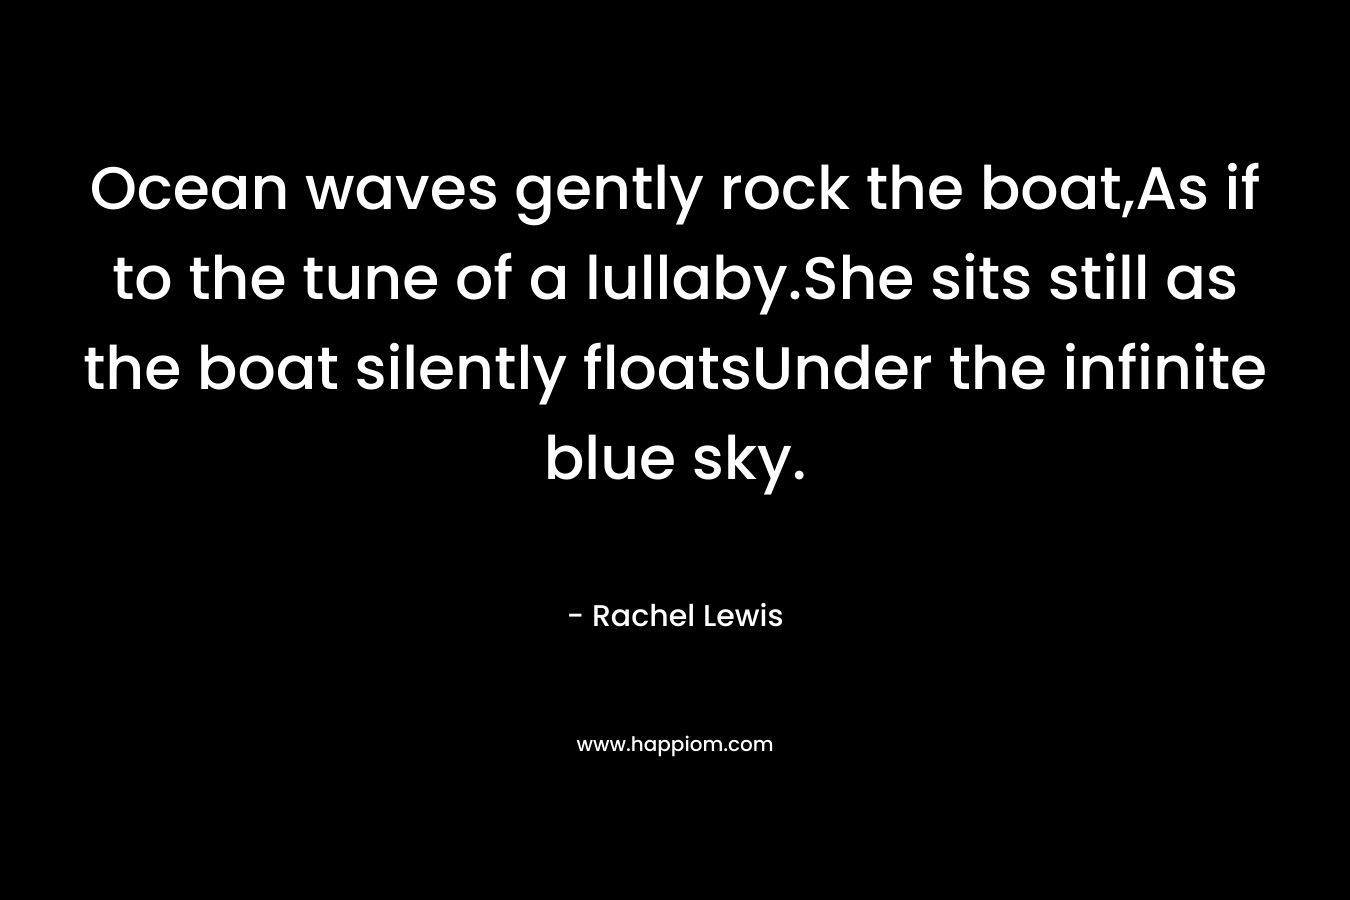 Ocean waves gently rock the boat,As if to the tune of a lullaby.She sits still as the boat silently floatsUnder the infinite blue sky. – Rachel Lewis